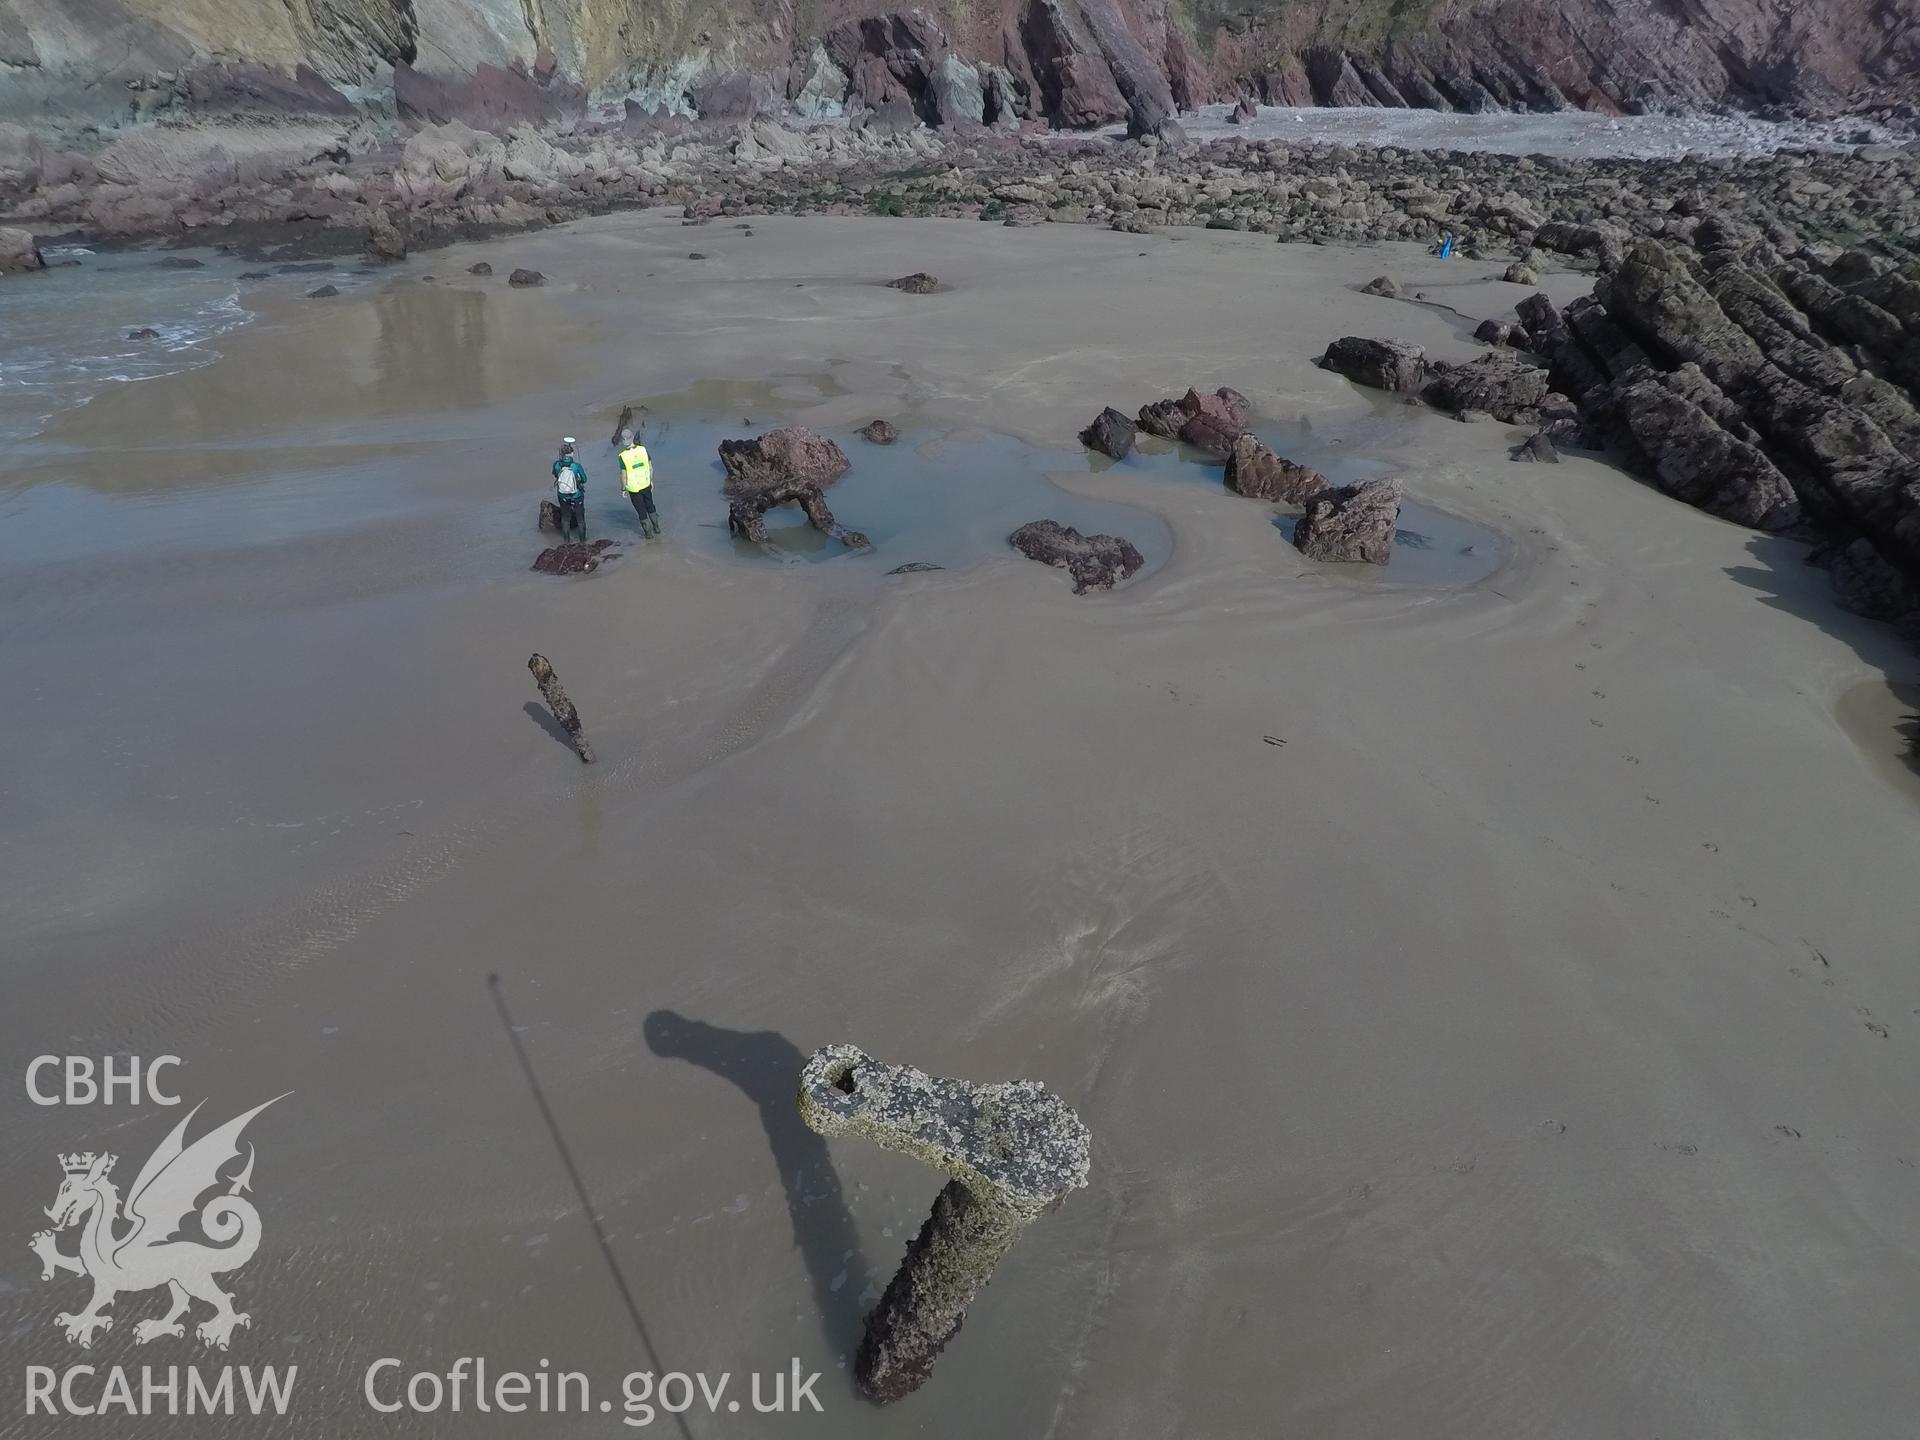 Pole camera shot of CHERISH team surveying the Albion paddle steamer shipwreck, exposed on the beach at low tide Taken by Daniel Hunt. Produced with EU funds through the Ireland Wales Co-operation Programme 2014-2023. All material made freely available th